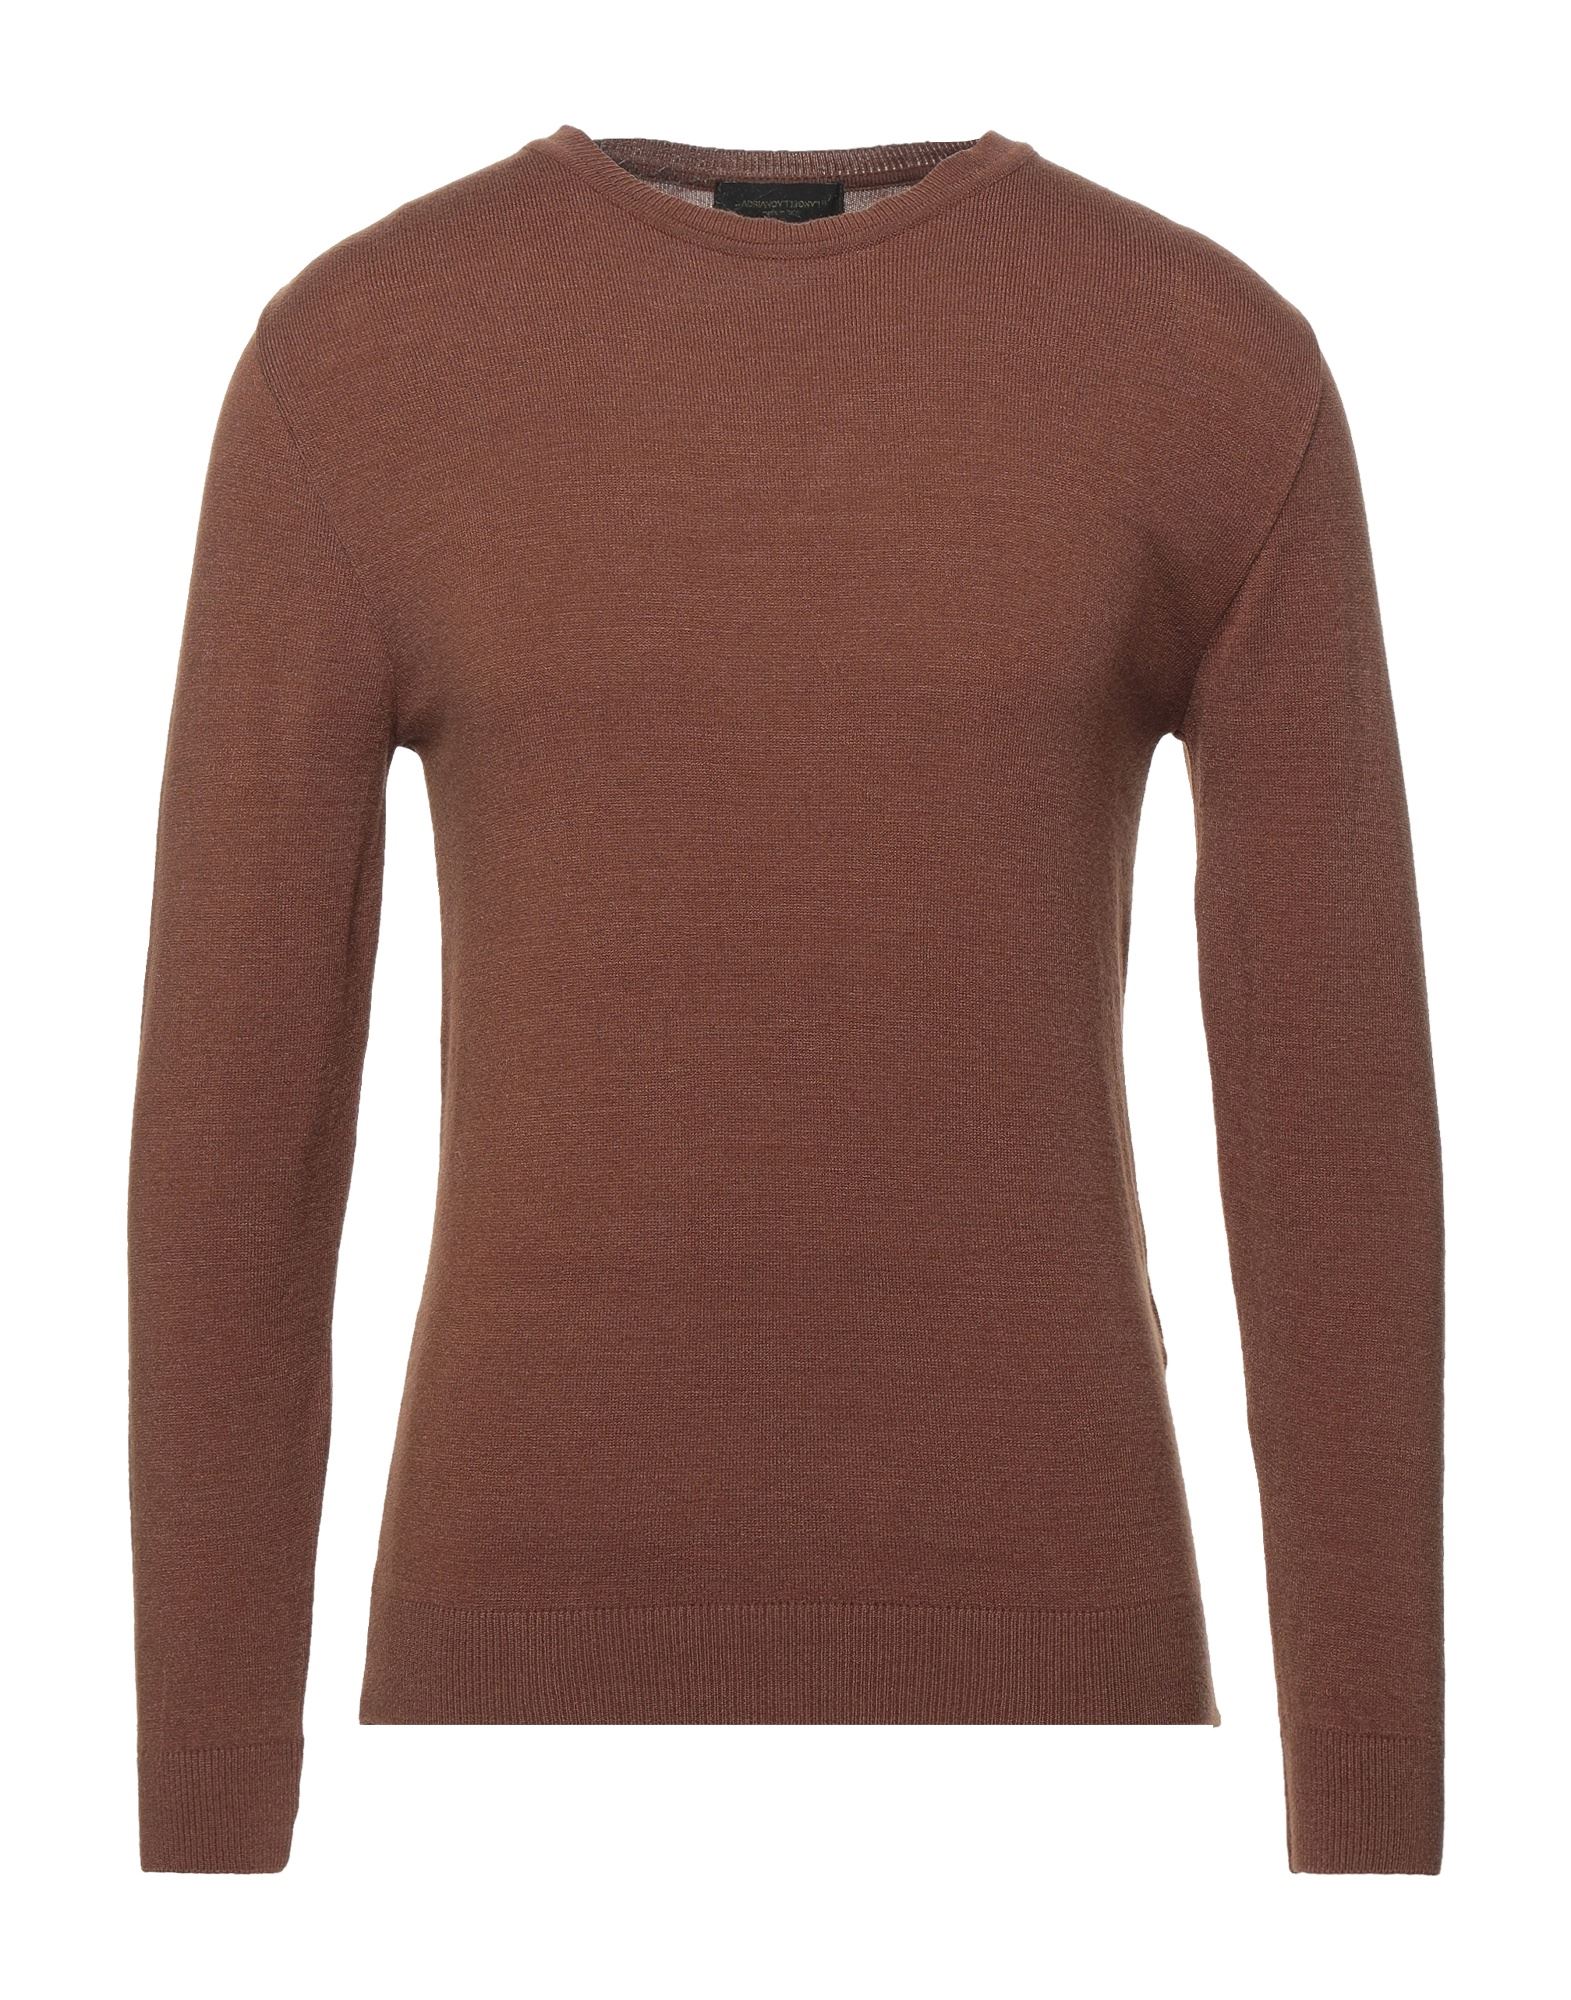 Adriano Langella Sweaters In Brown